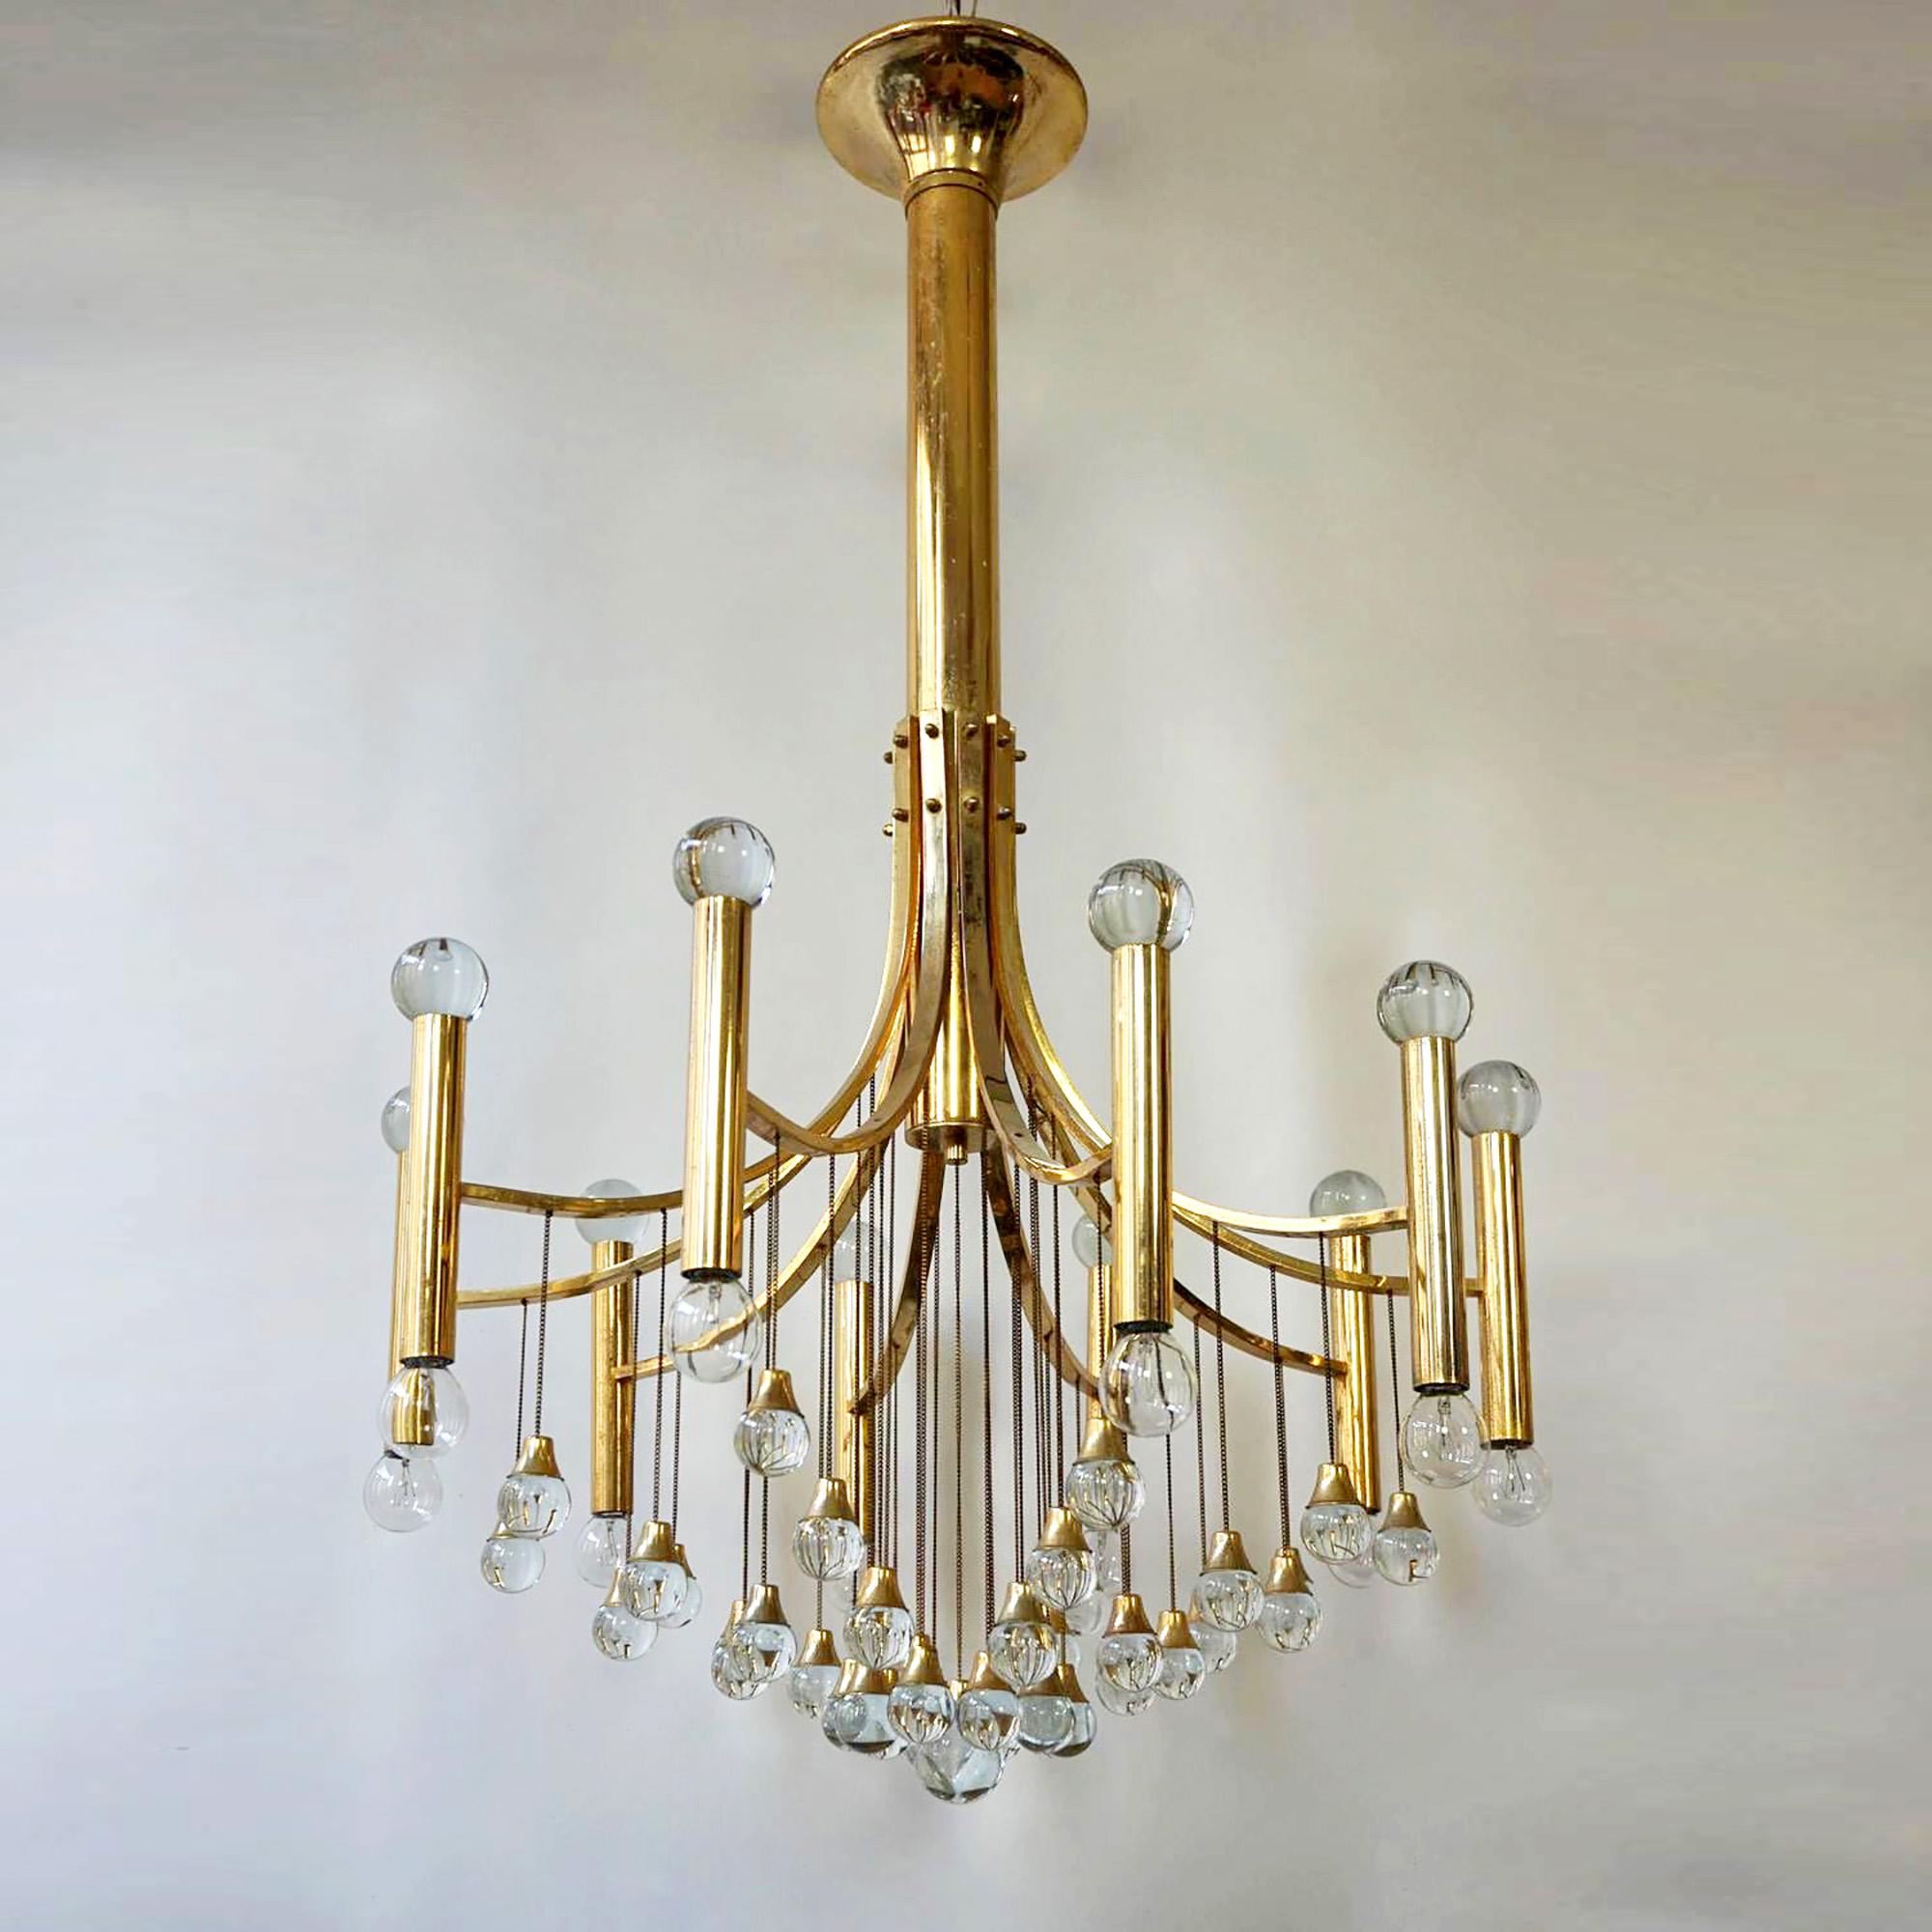 Mid-Century Modern Gaetano Sciolari Gold-Plated Chandelier with Crystal Spheres For Sale